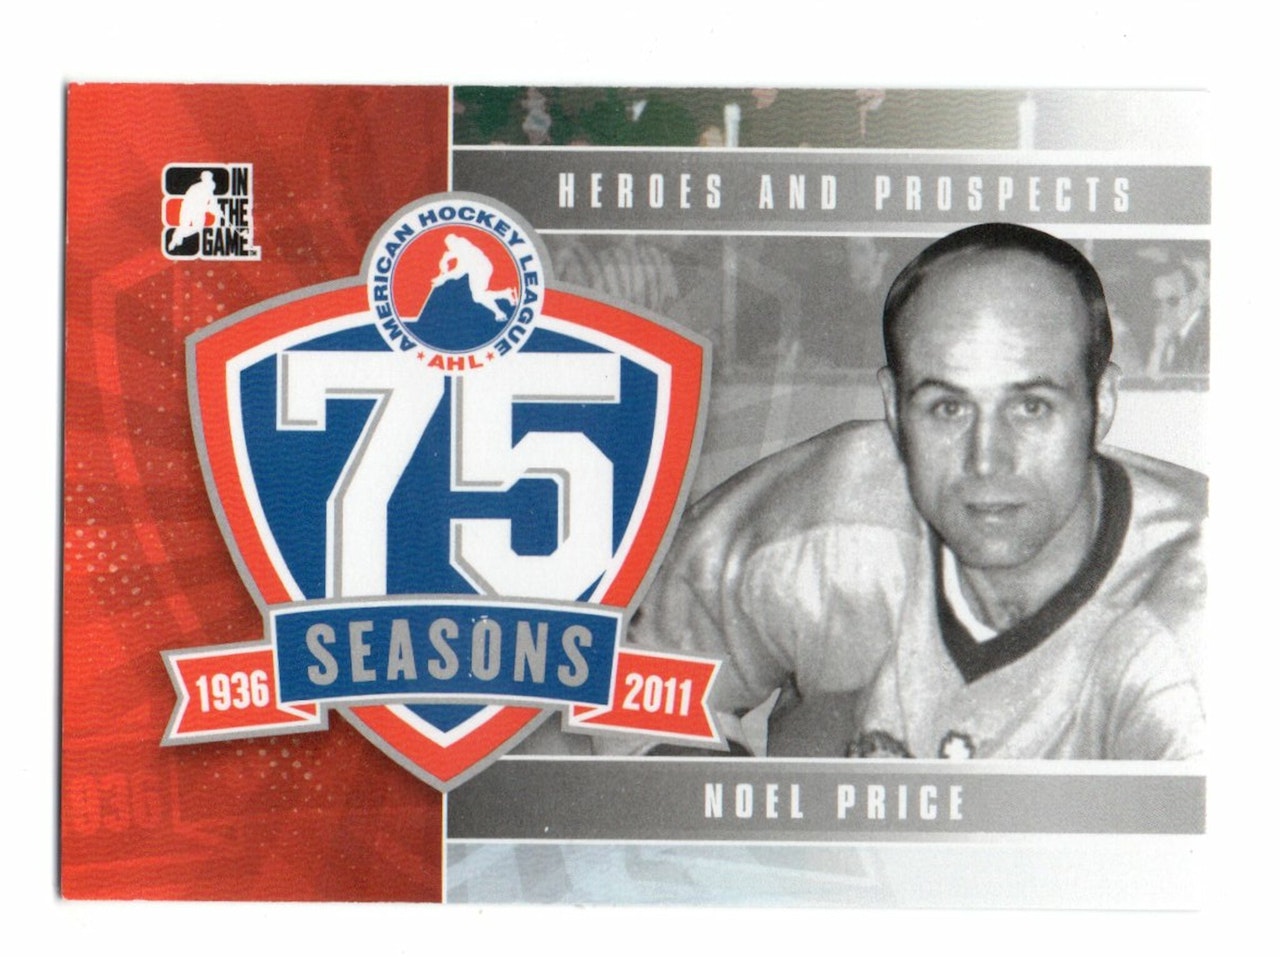 2010-11 ITG Heroes and Prospects AHL 75th Anniversary #AHLA27 Noel Price (20-X339-AHL)